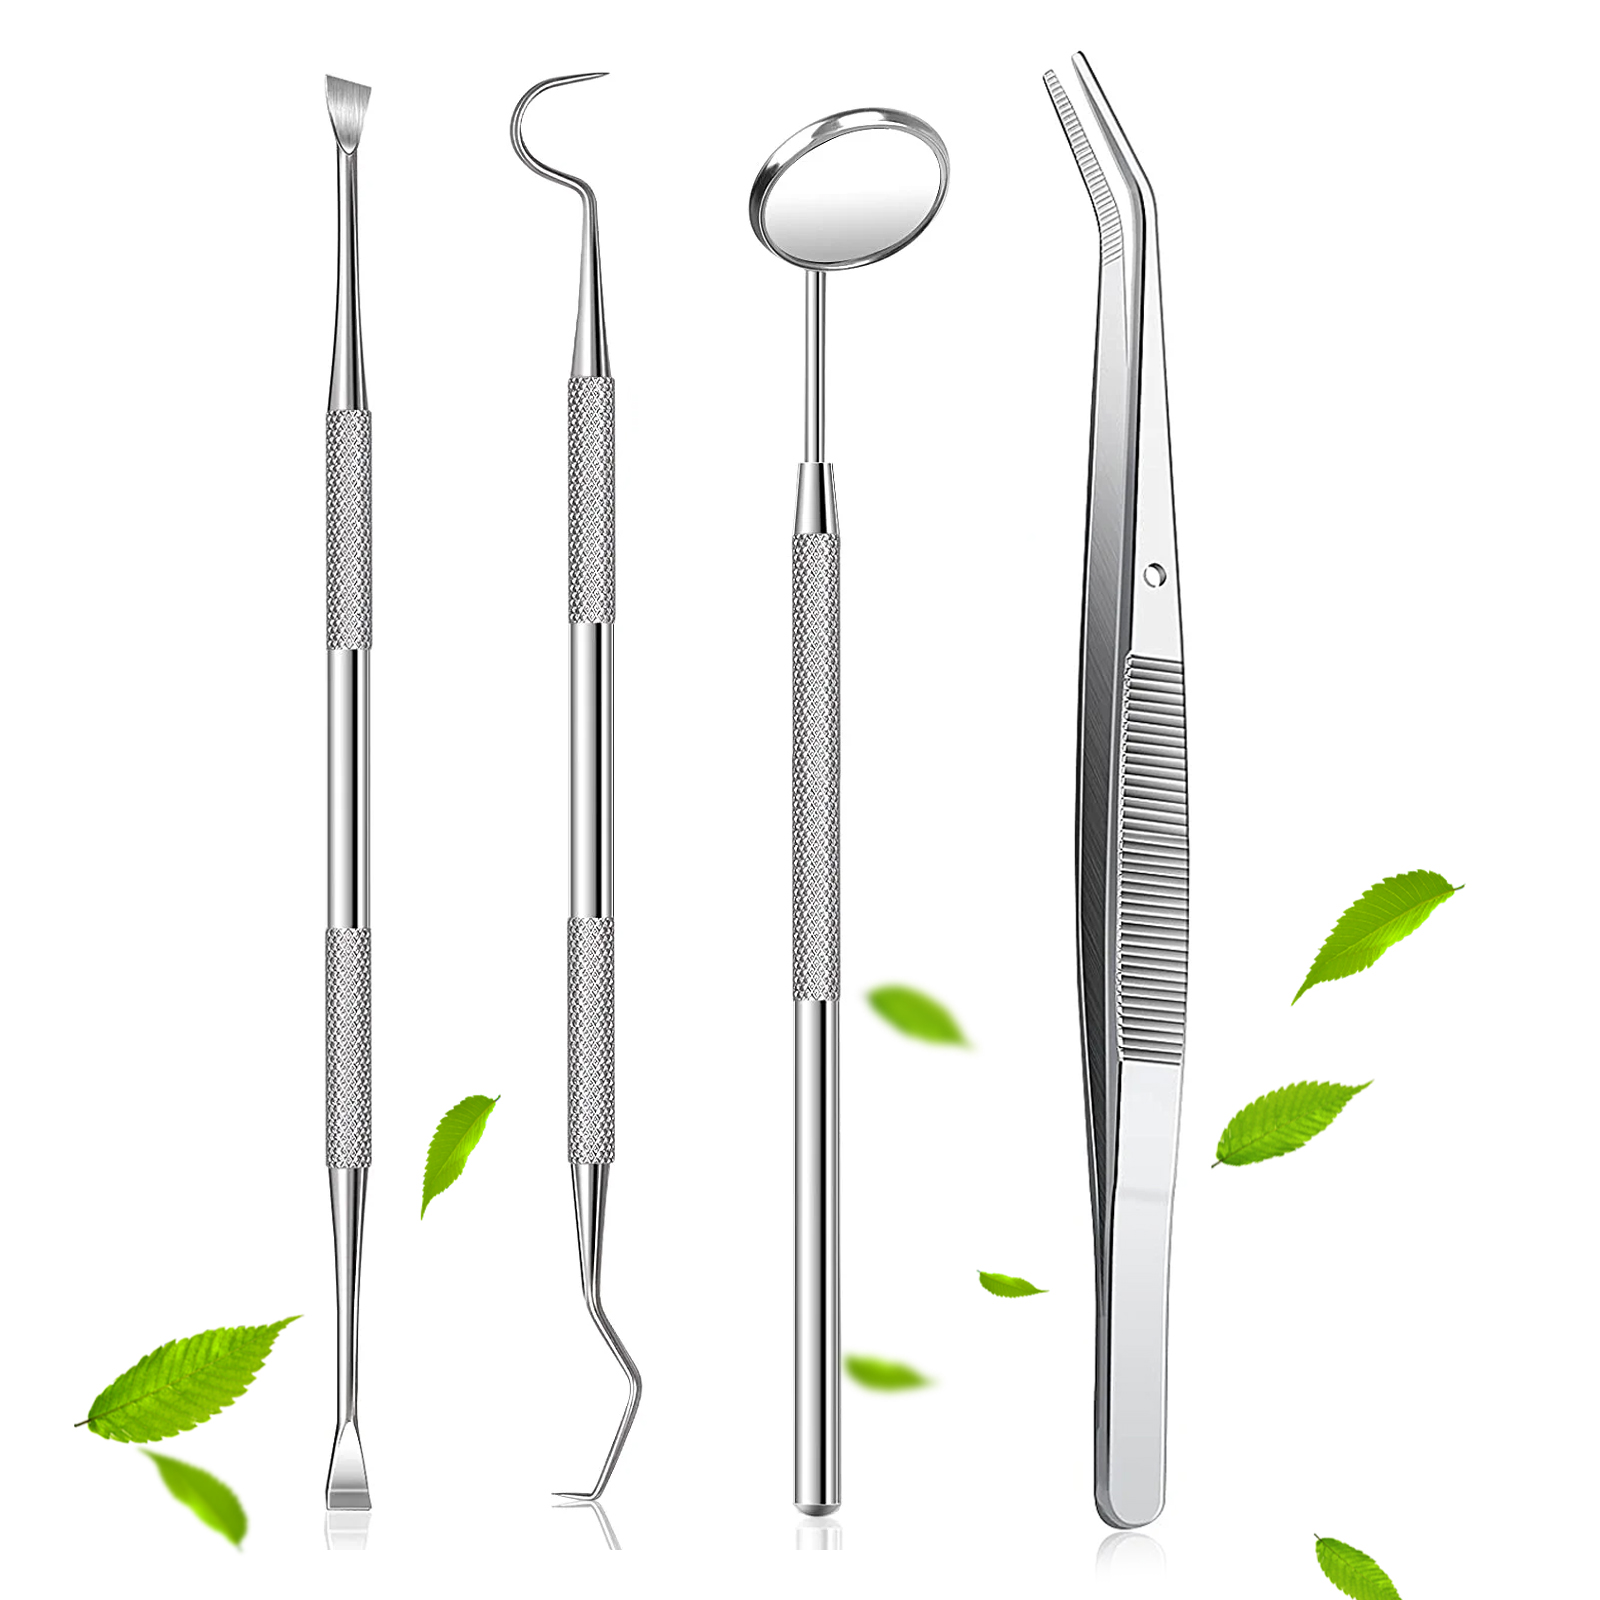 5 Great Dental Tools for Home Use